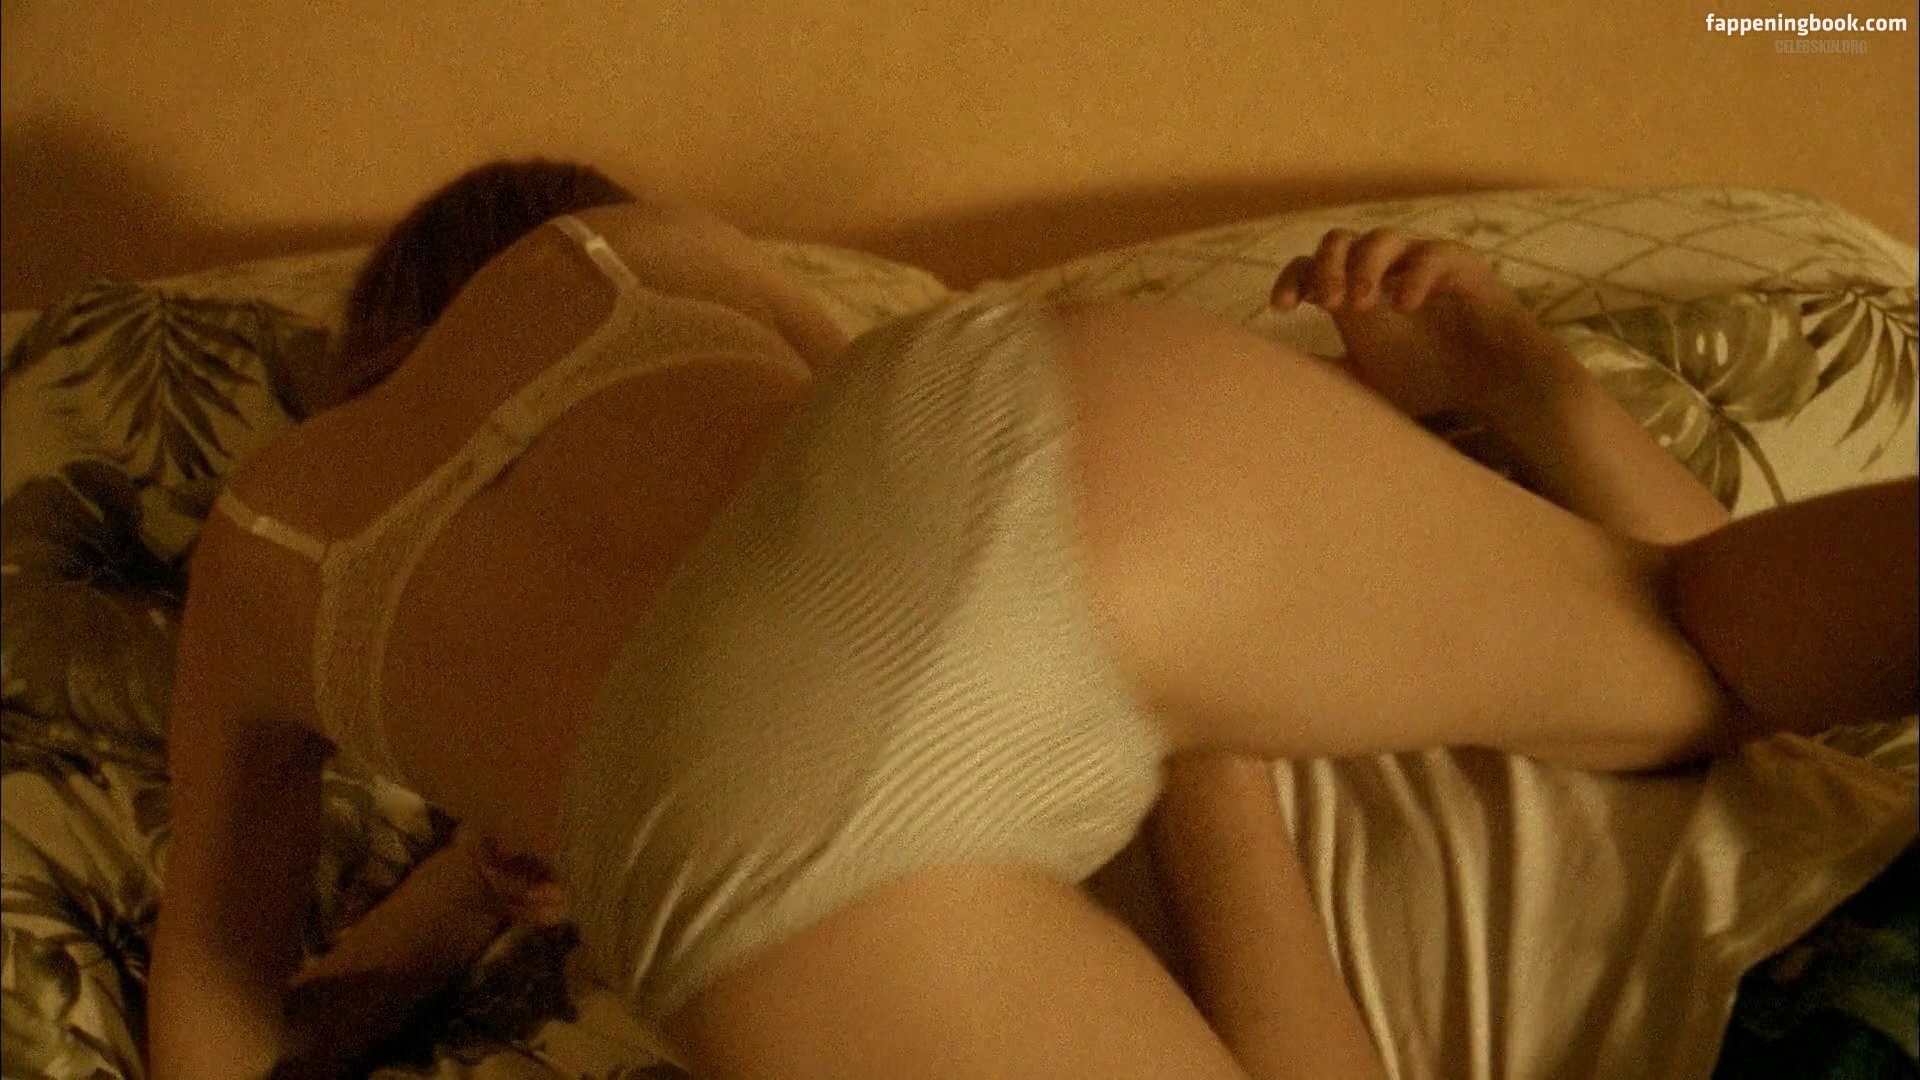 Emily browning sexy pics